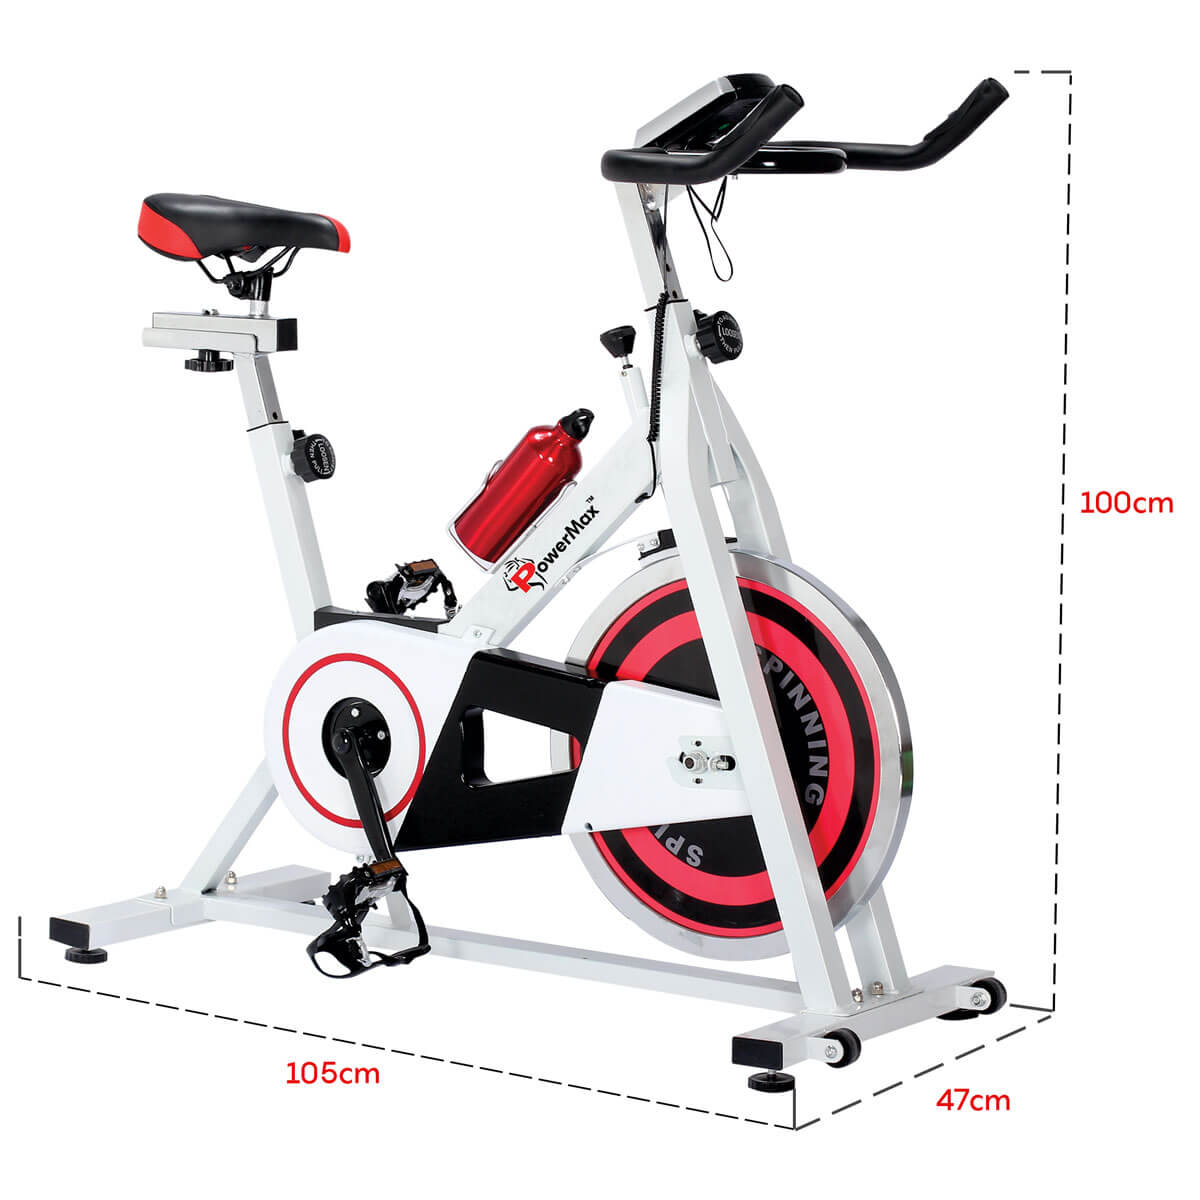 Home Use Group Bike at Low Price